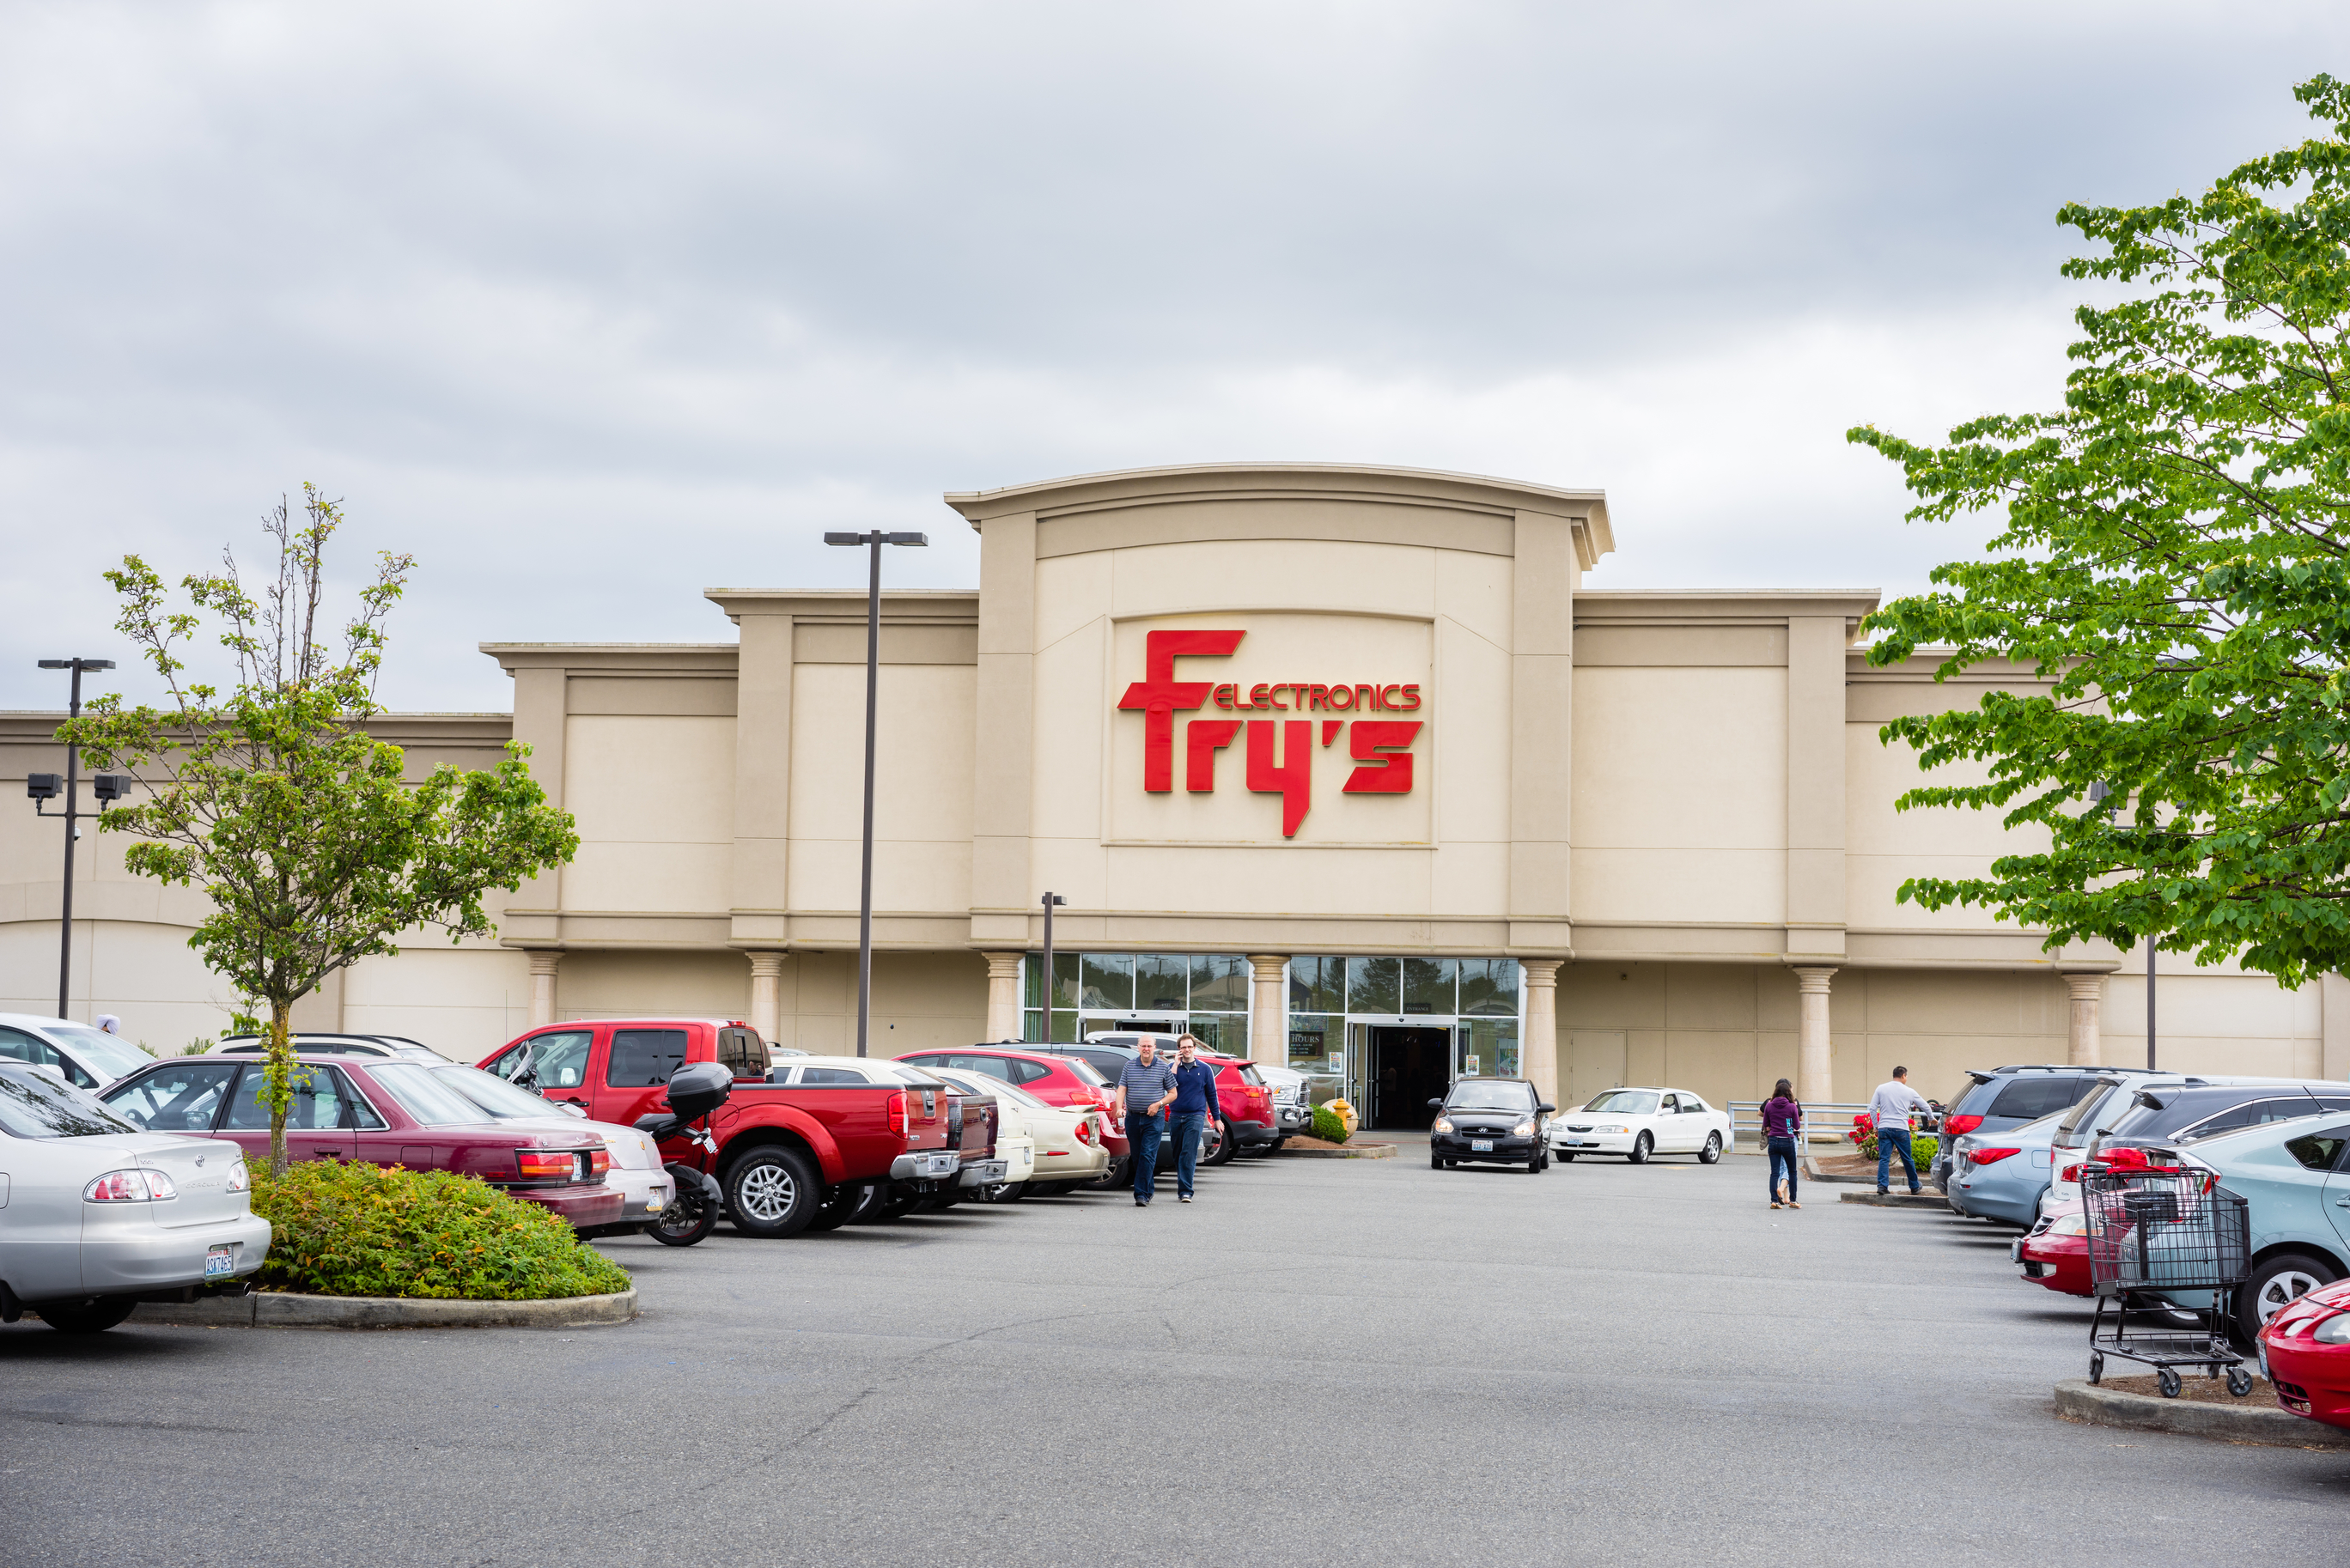 Fry’s Electronics Black Friday: Here are the best deals!